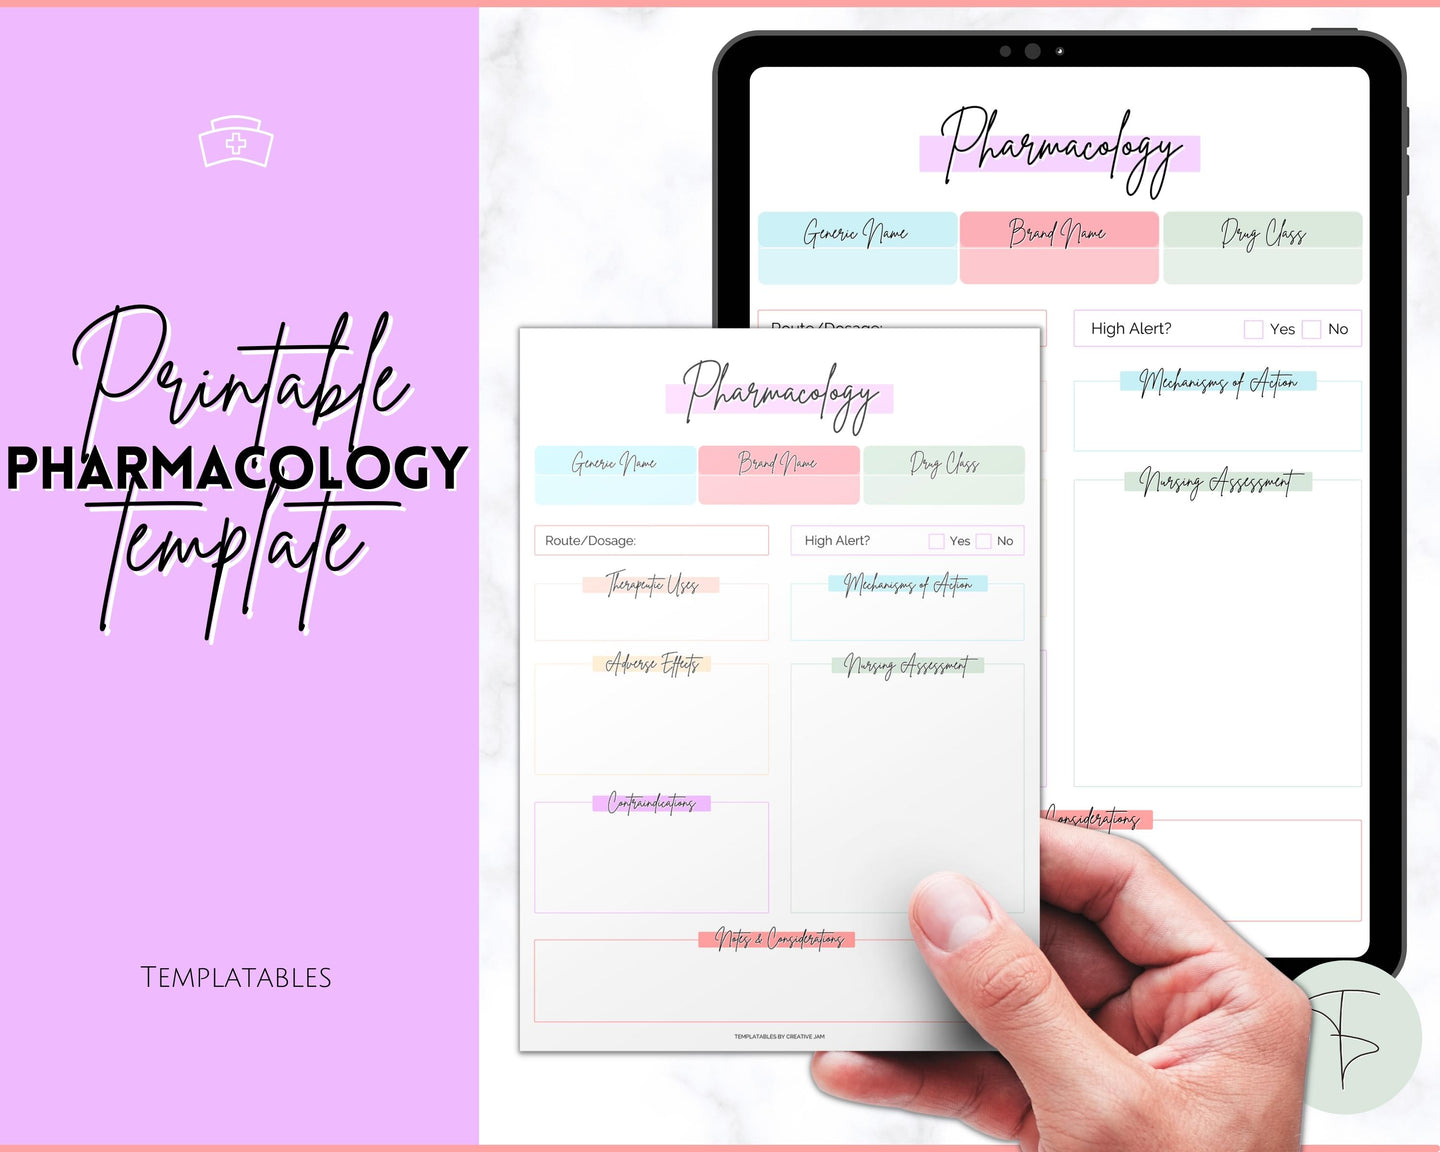 Pharmacology Nursing Template Printable | Pharmacology Study Guide, Notes & Flash Cards | Pastel Rainbow